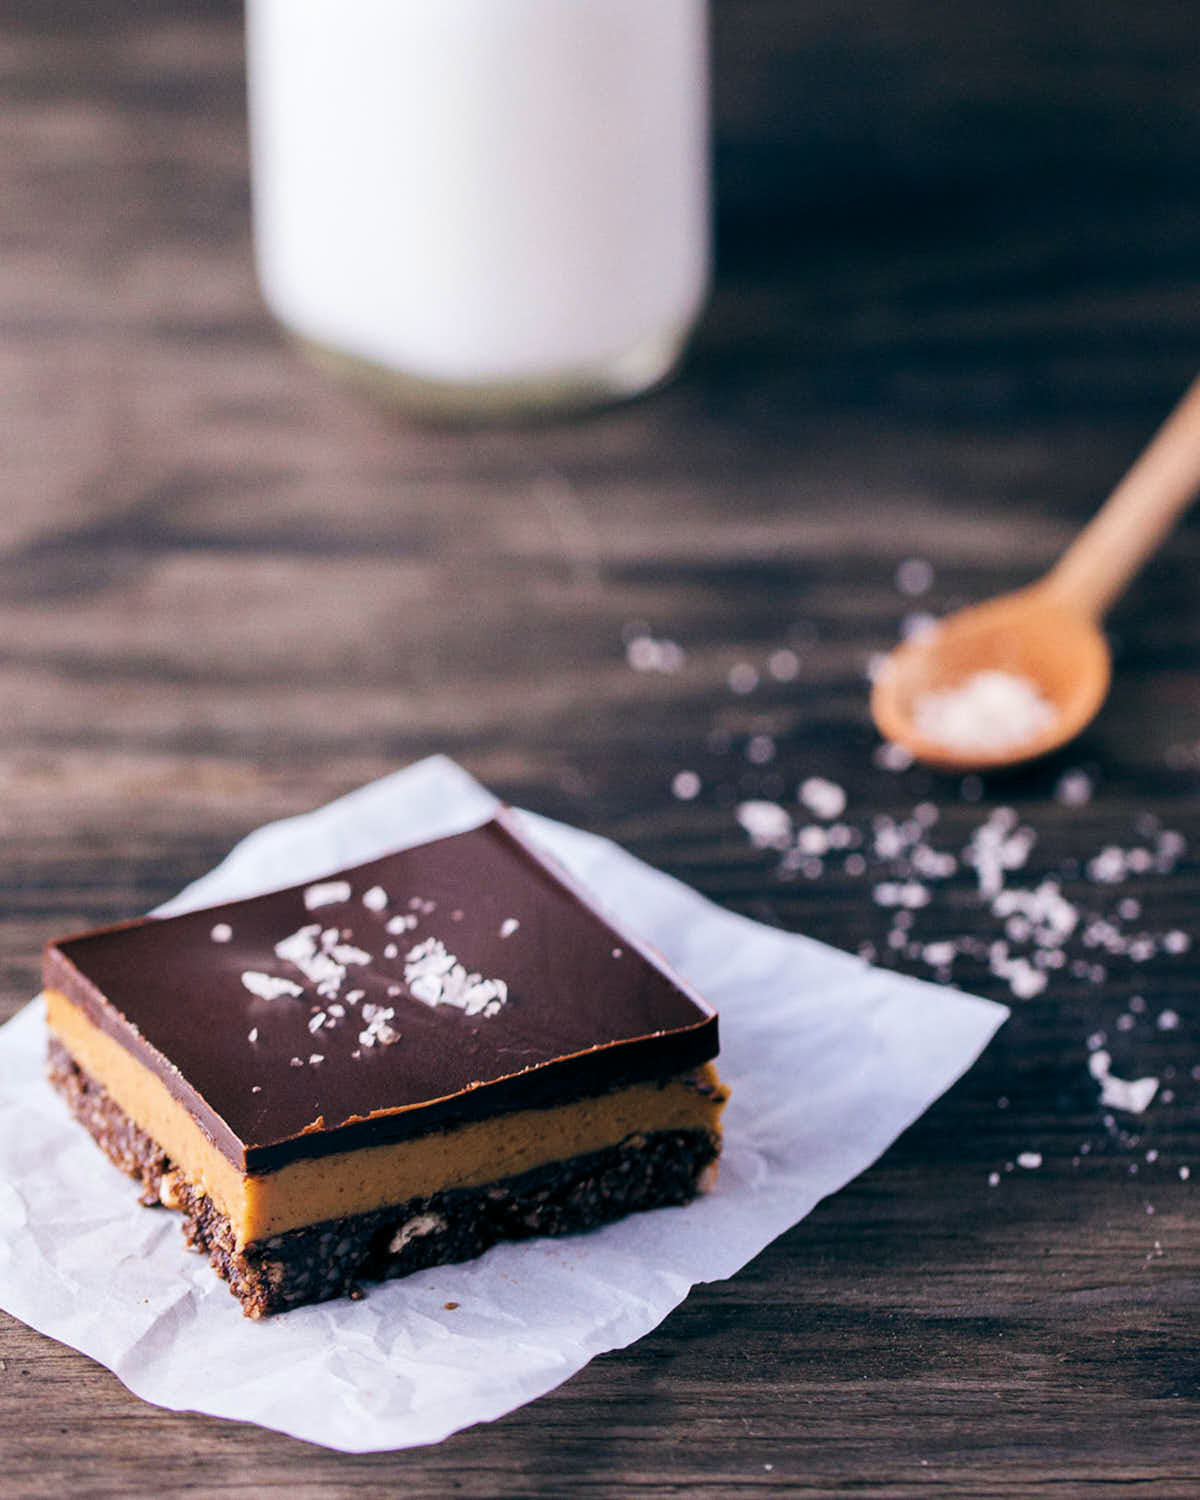 Chocolate peanut butter bars being topped with sea salt